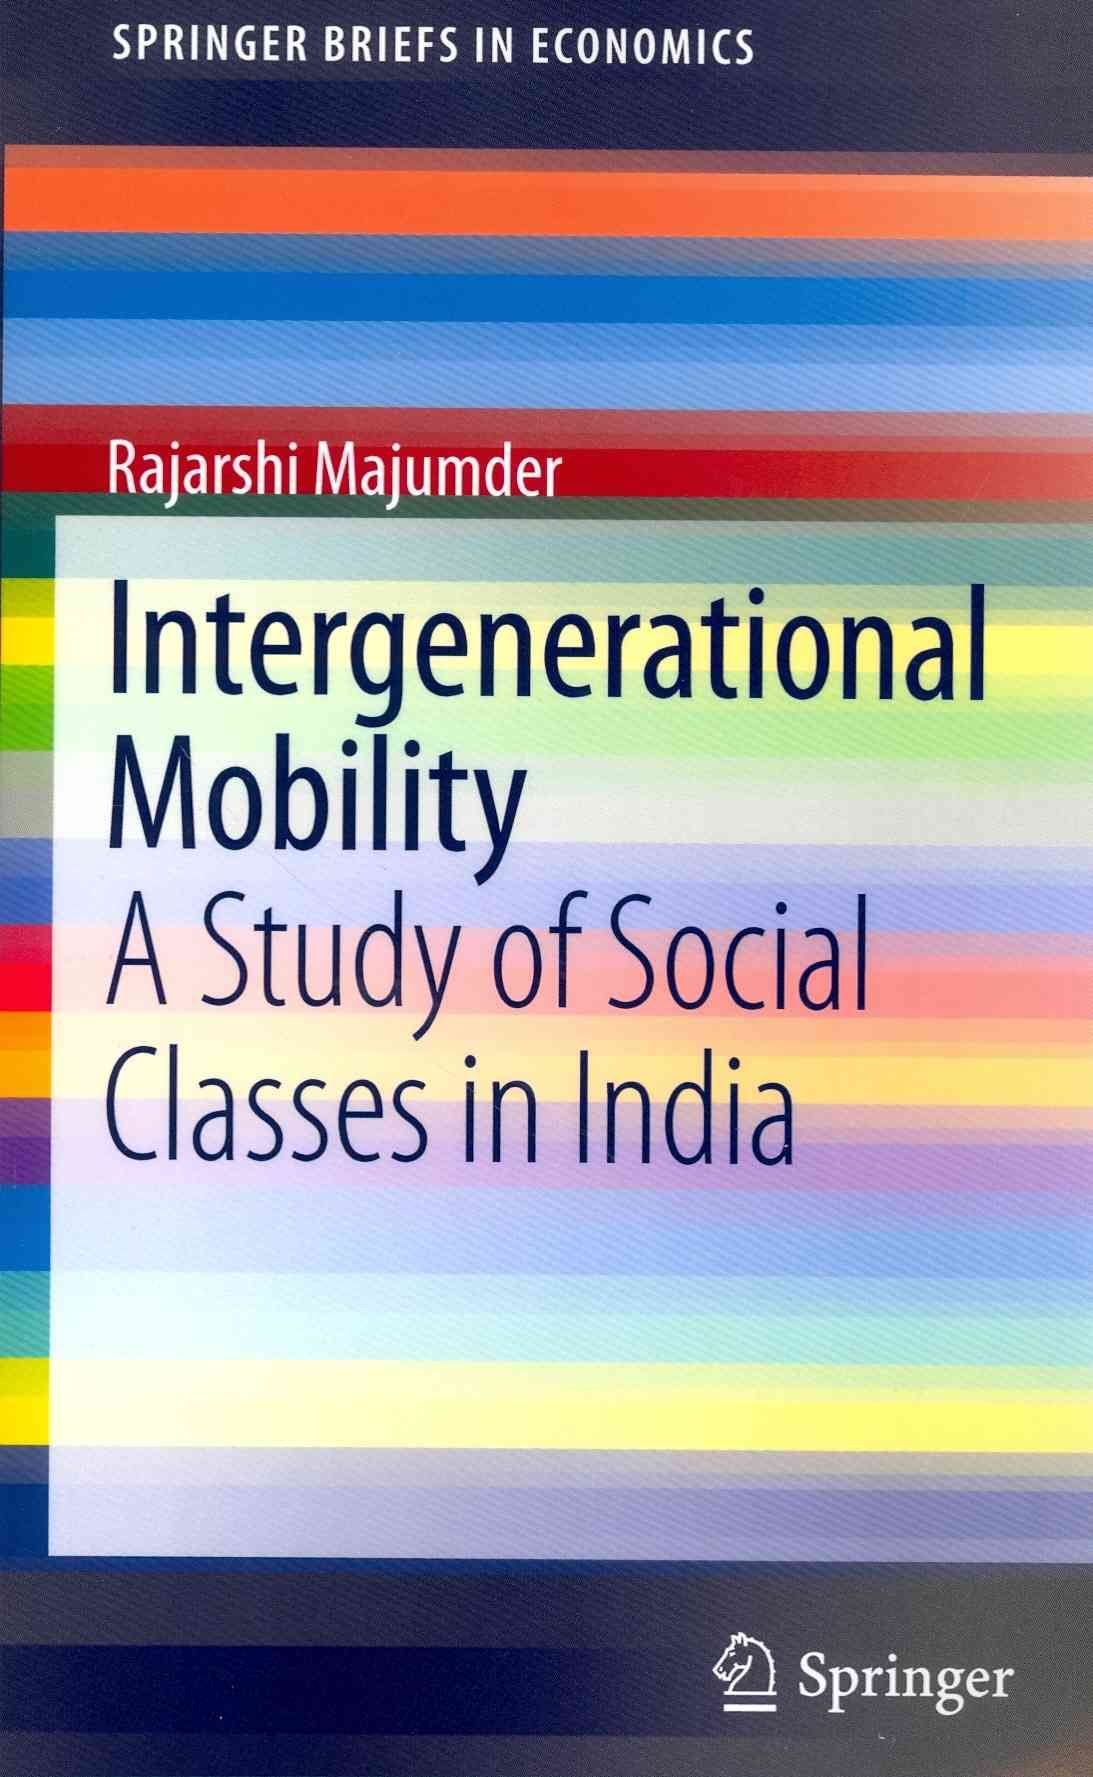 Intergenerational Mobility